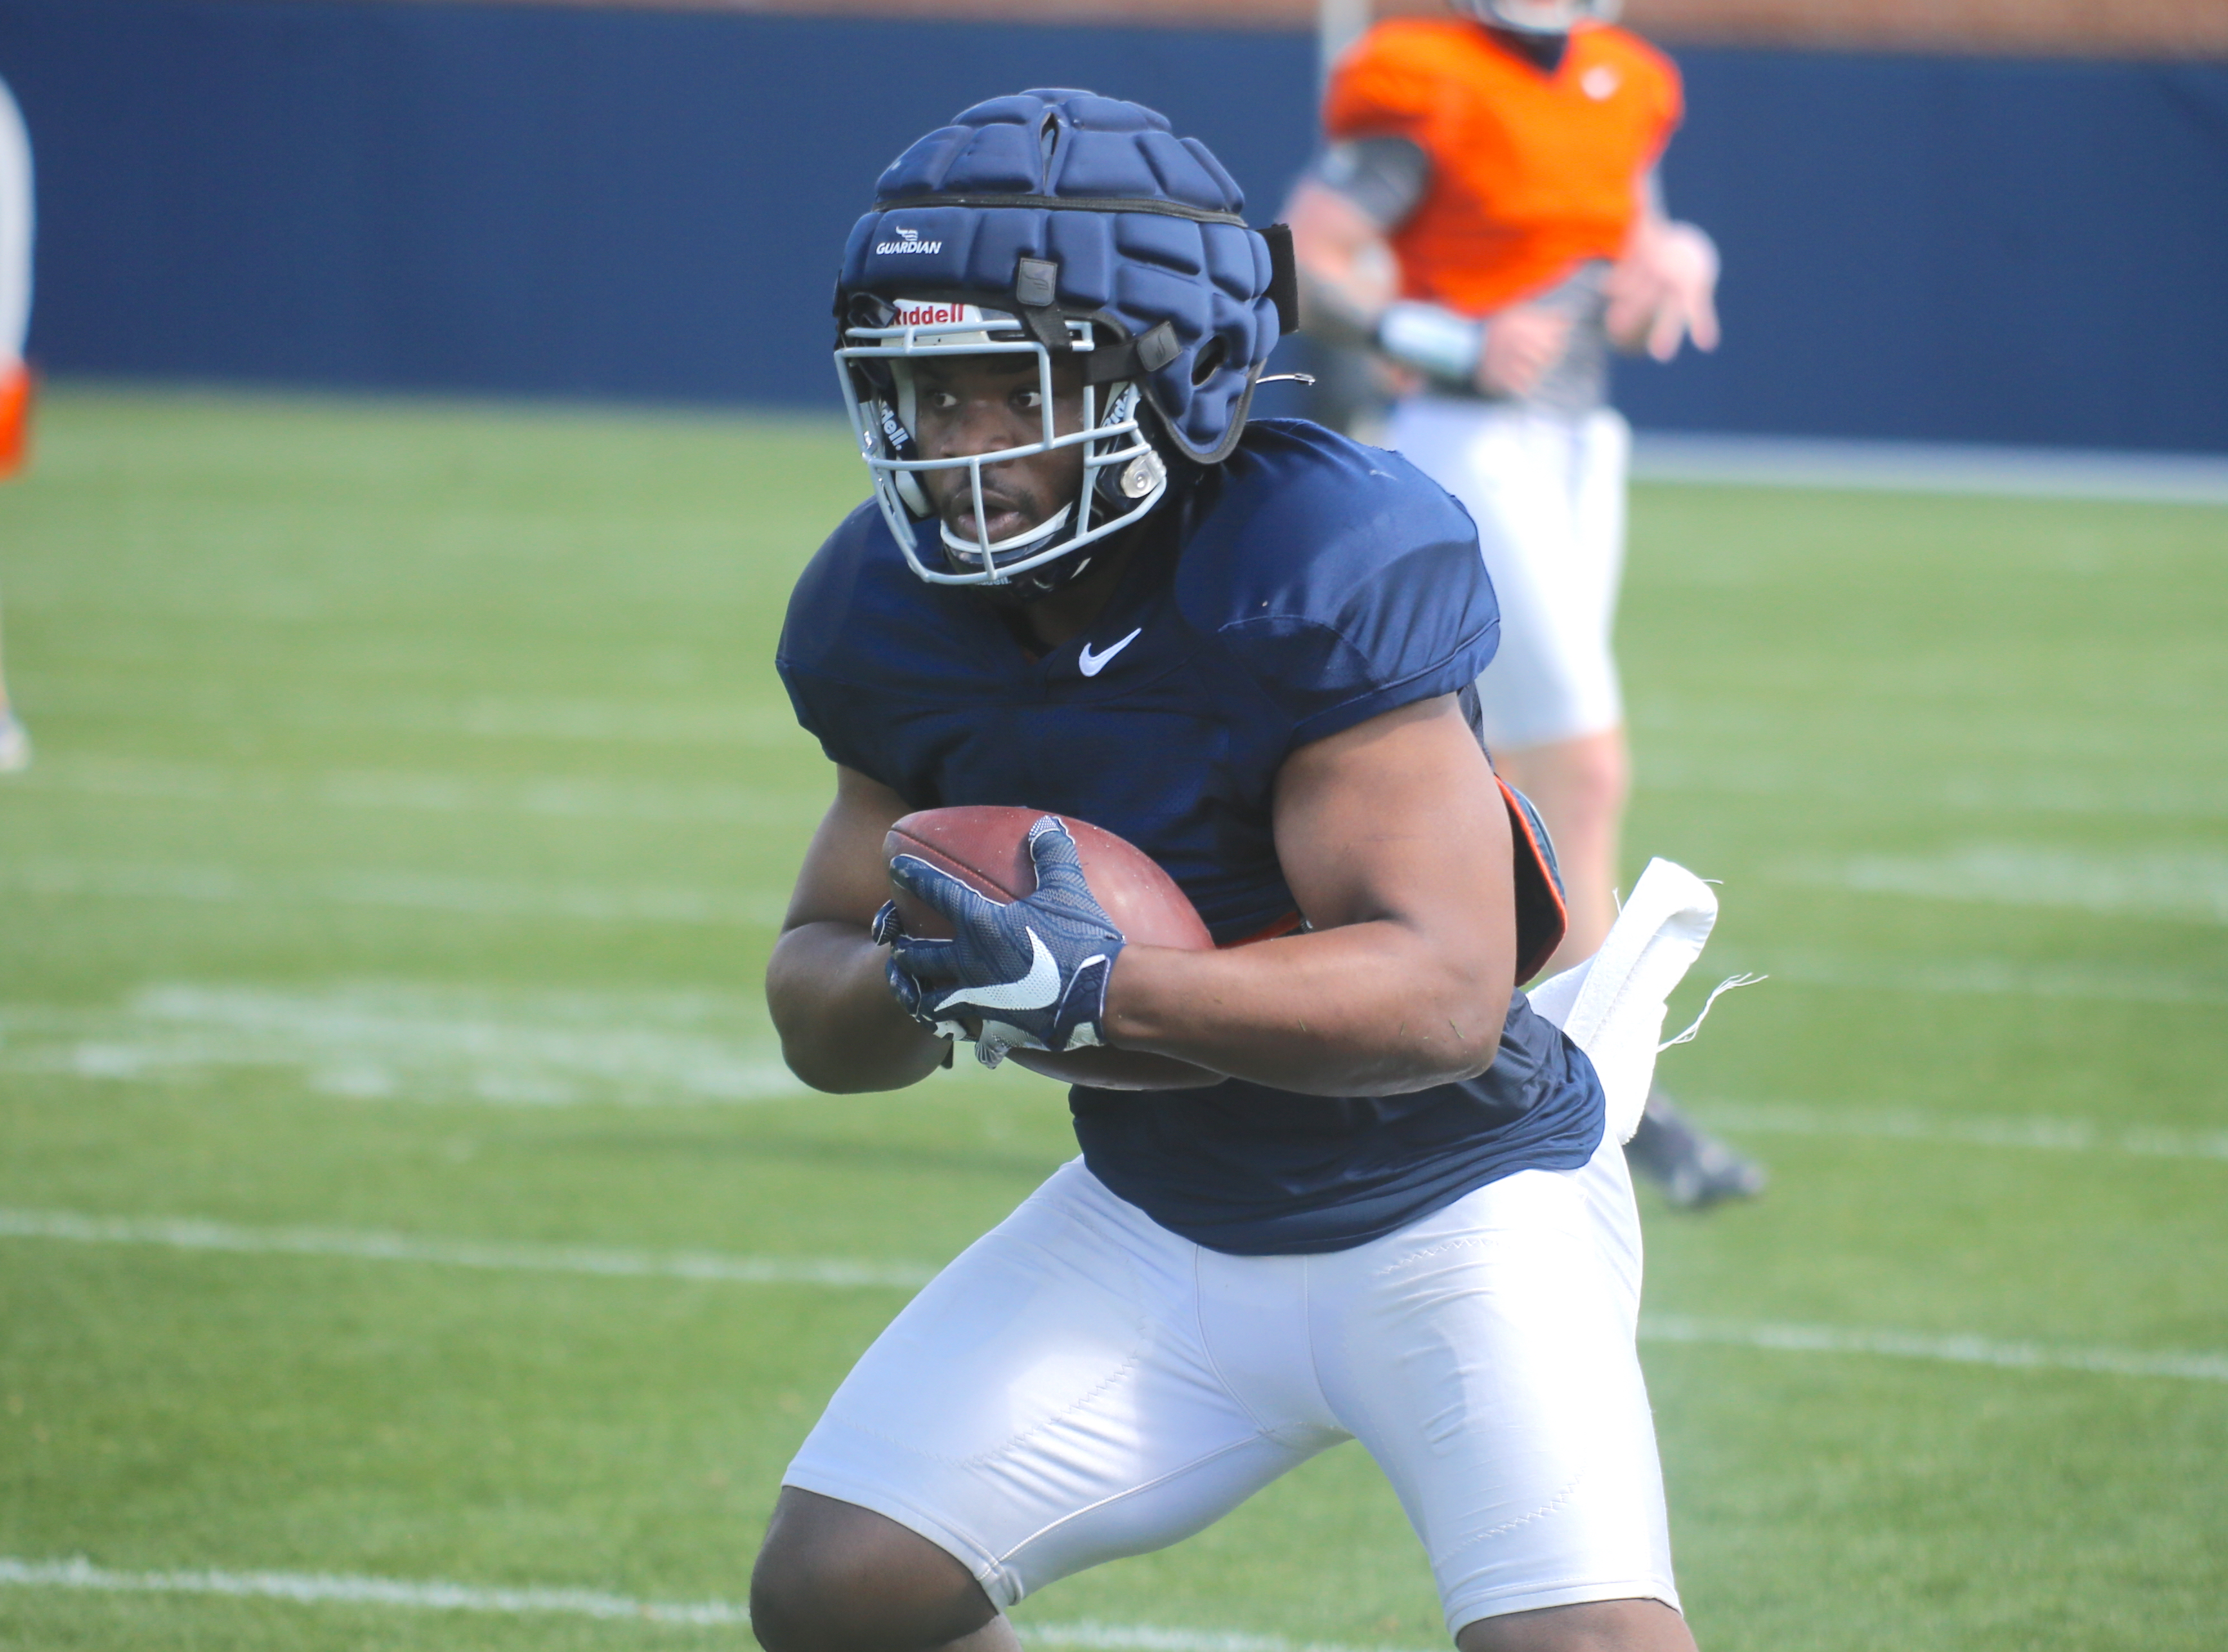 Virginia has a "fierce" competition going at running back per Bronco Mendenhall.